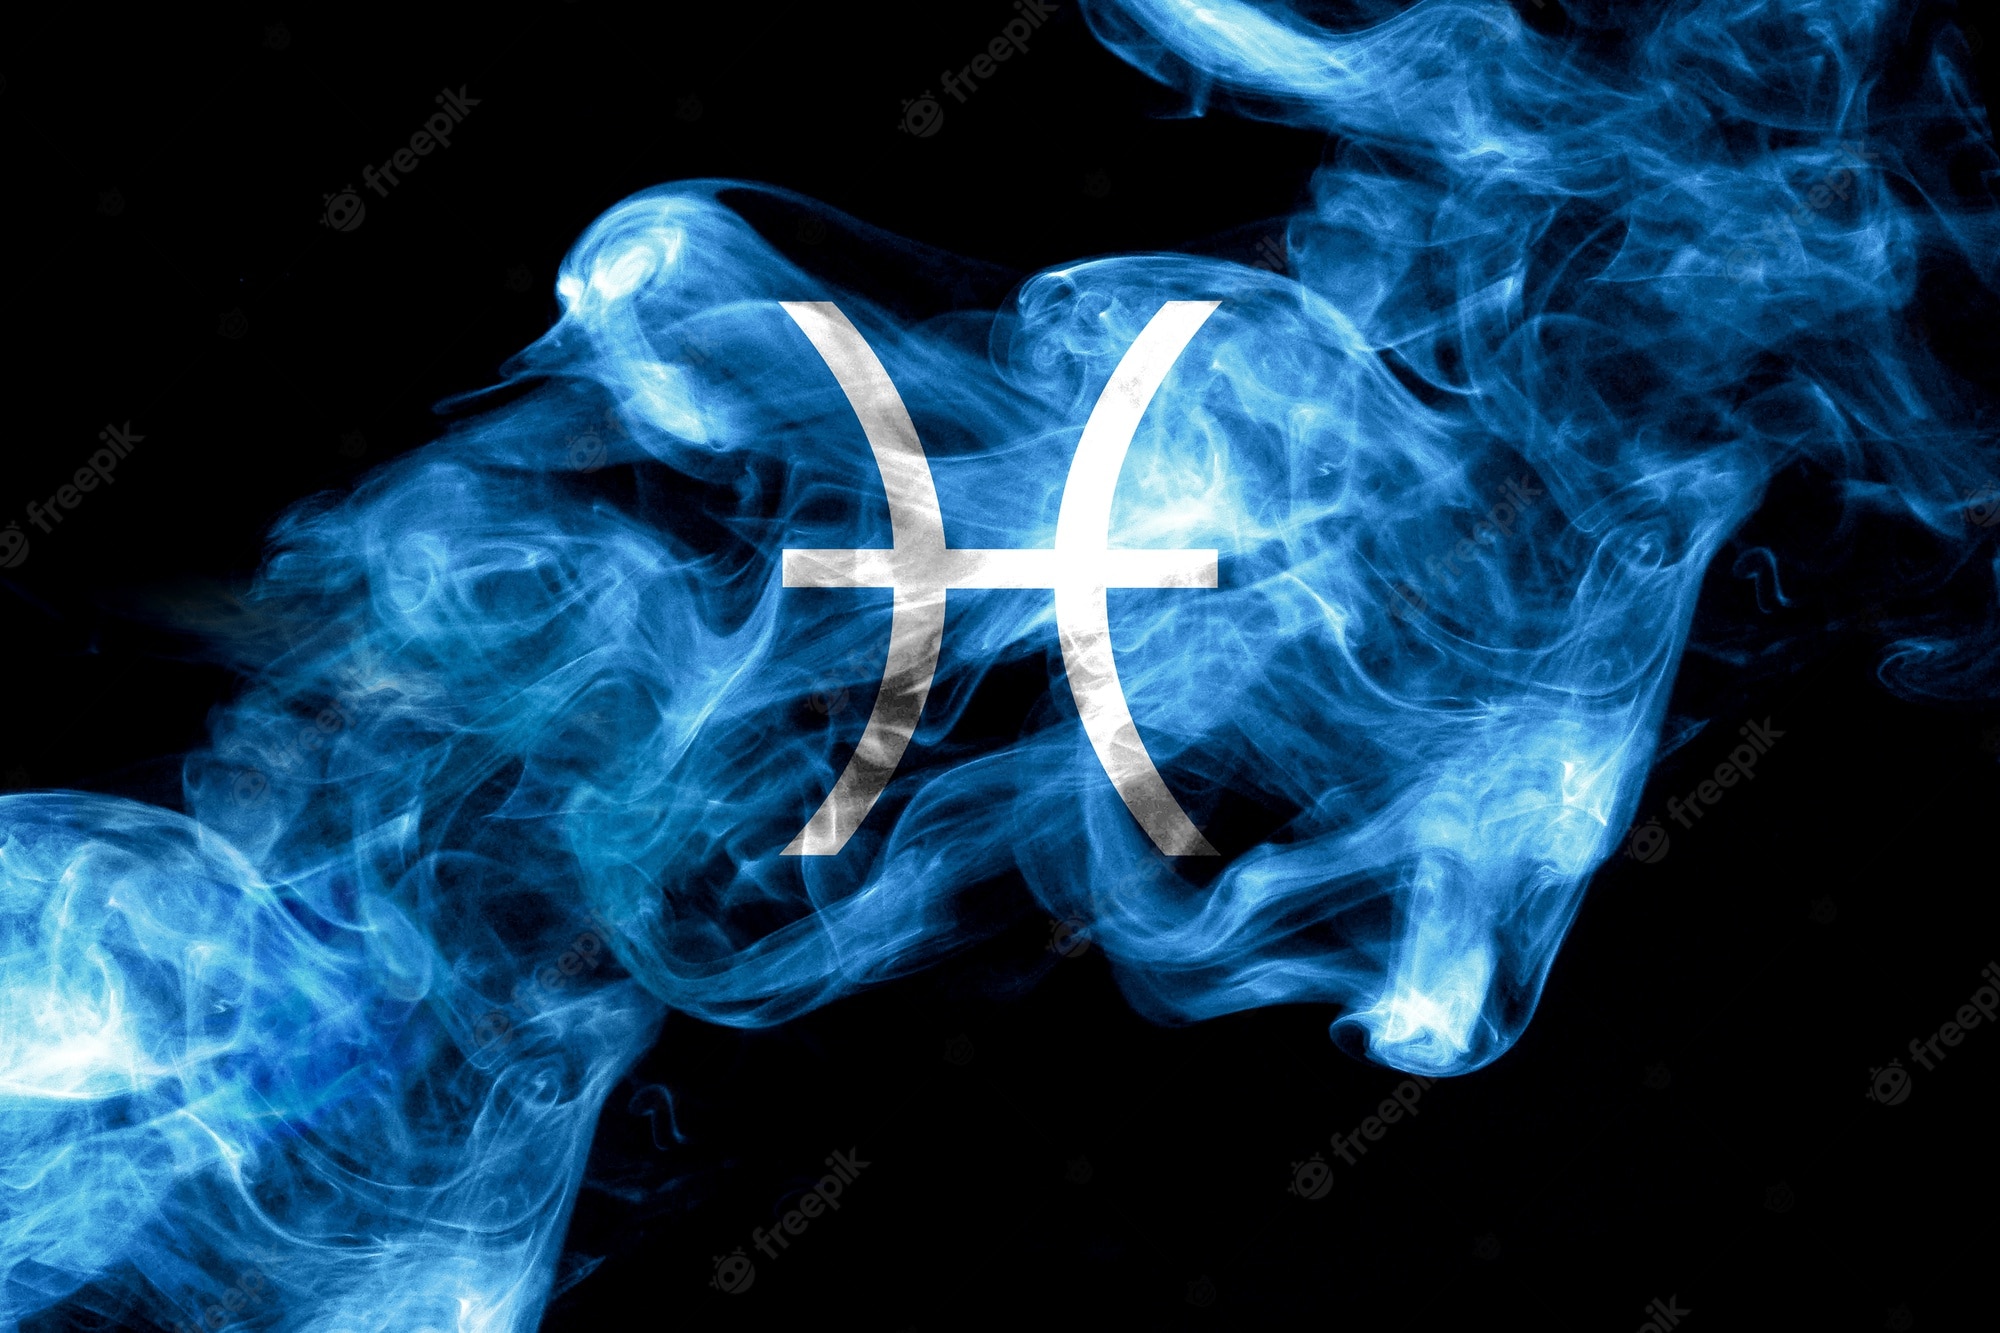 Cool Pisces Symbol Wallpapers